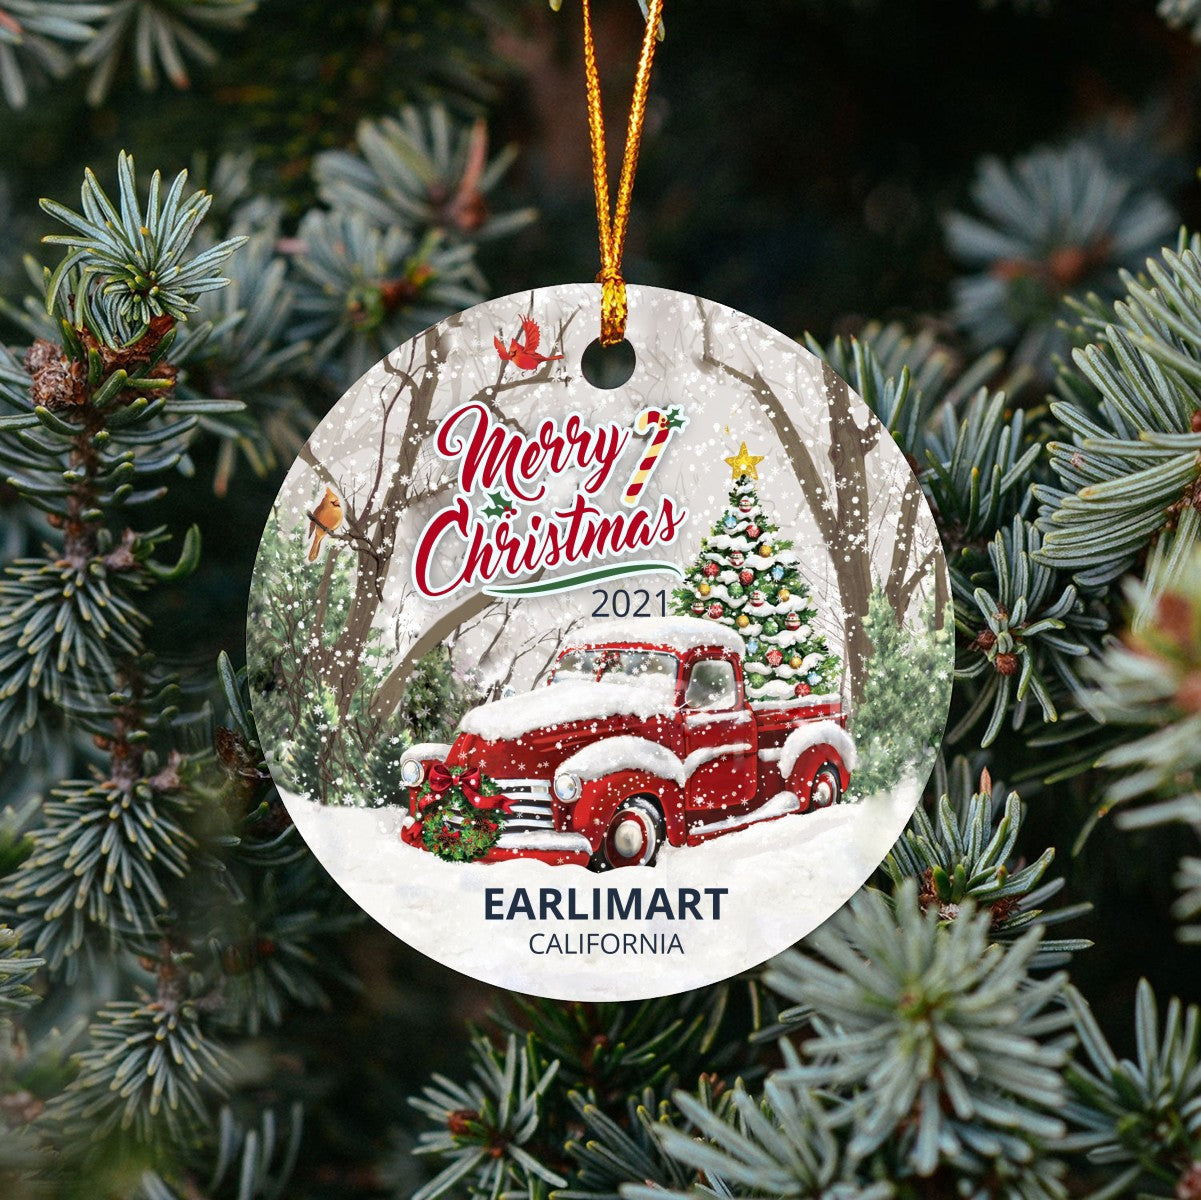 Christmas Tree Ornaments Earlimart - Ornament With Name City, State Earlimart California CA Ornament - Red Truck Xmas Ornaments 3'' Plastic Gift For Family, Friend And Housewarming